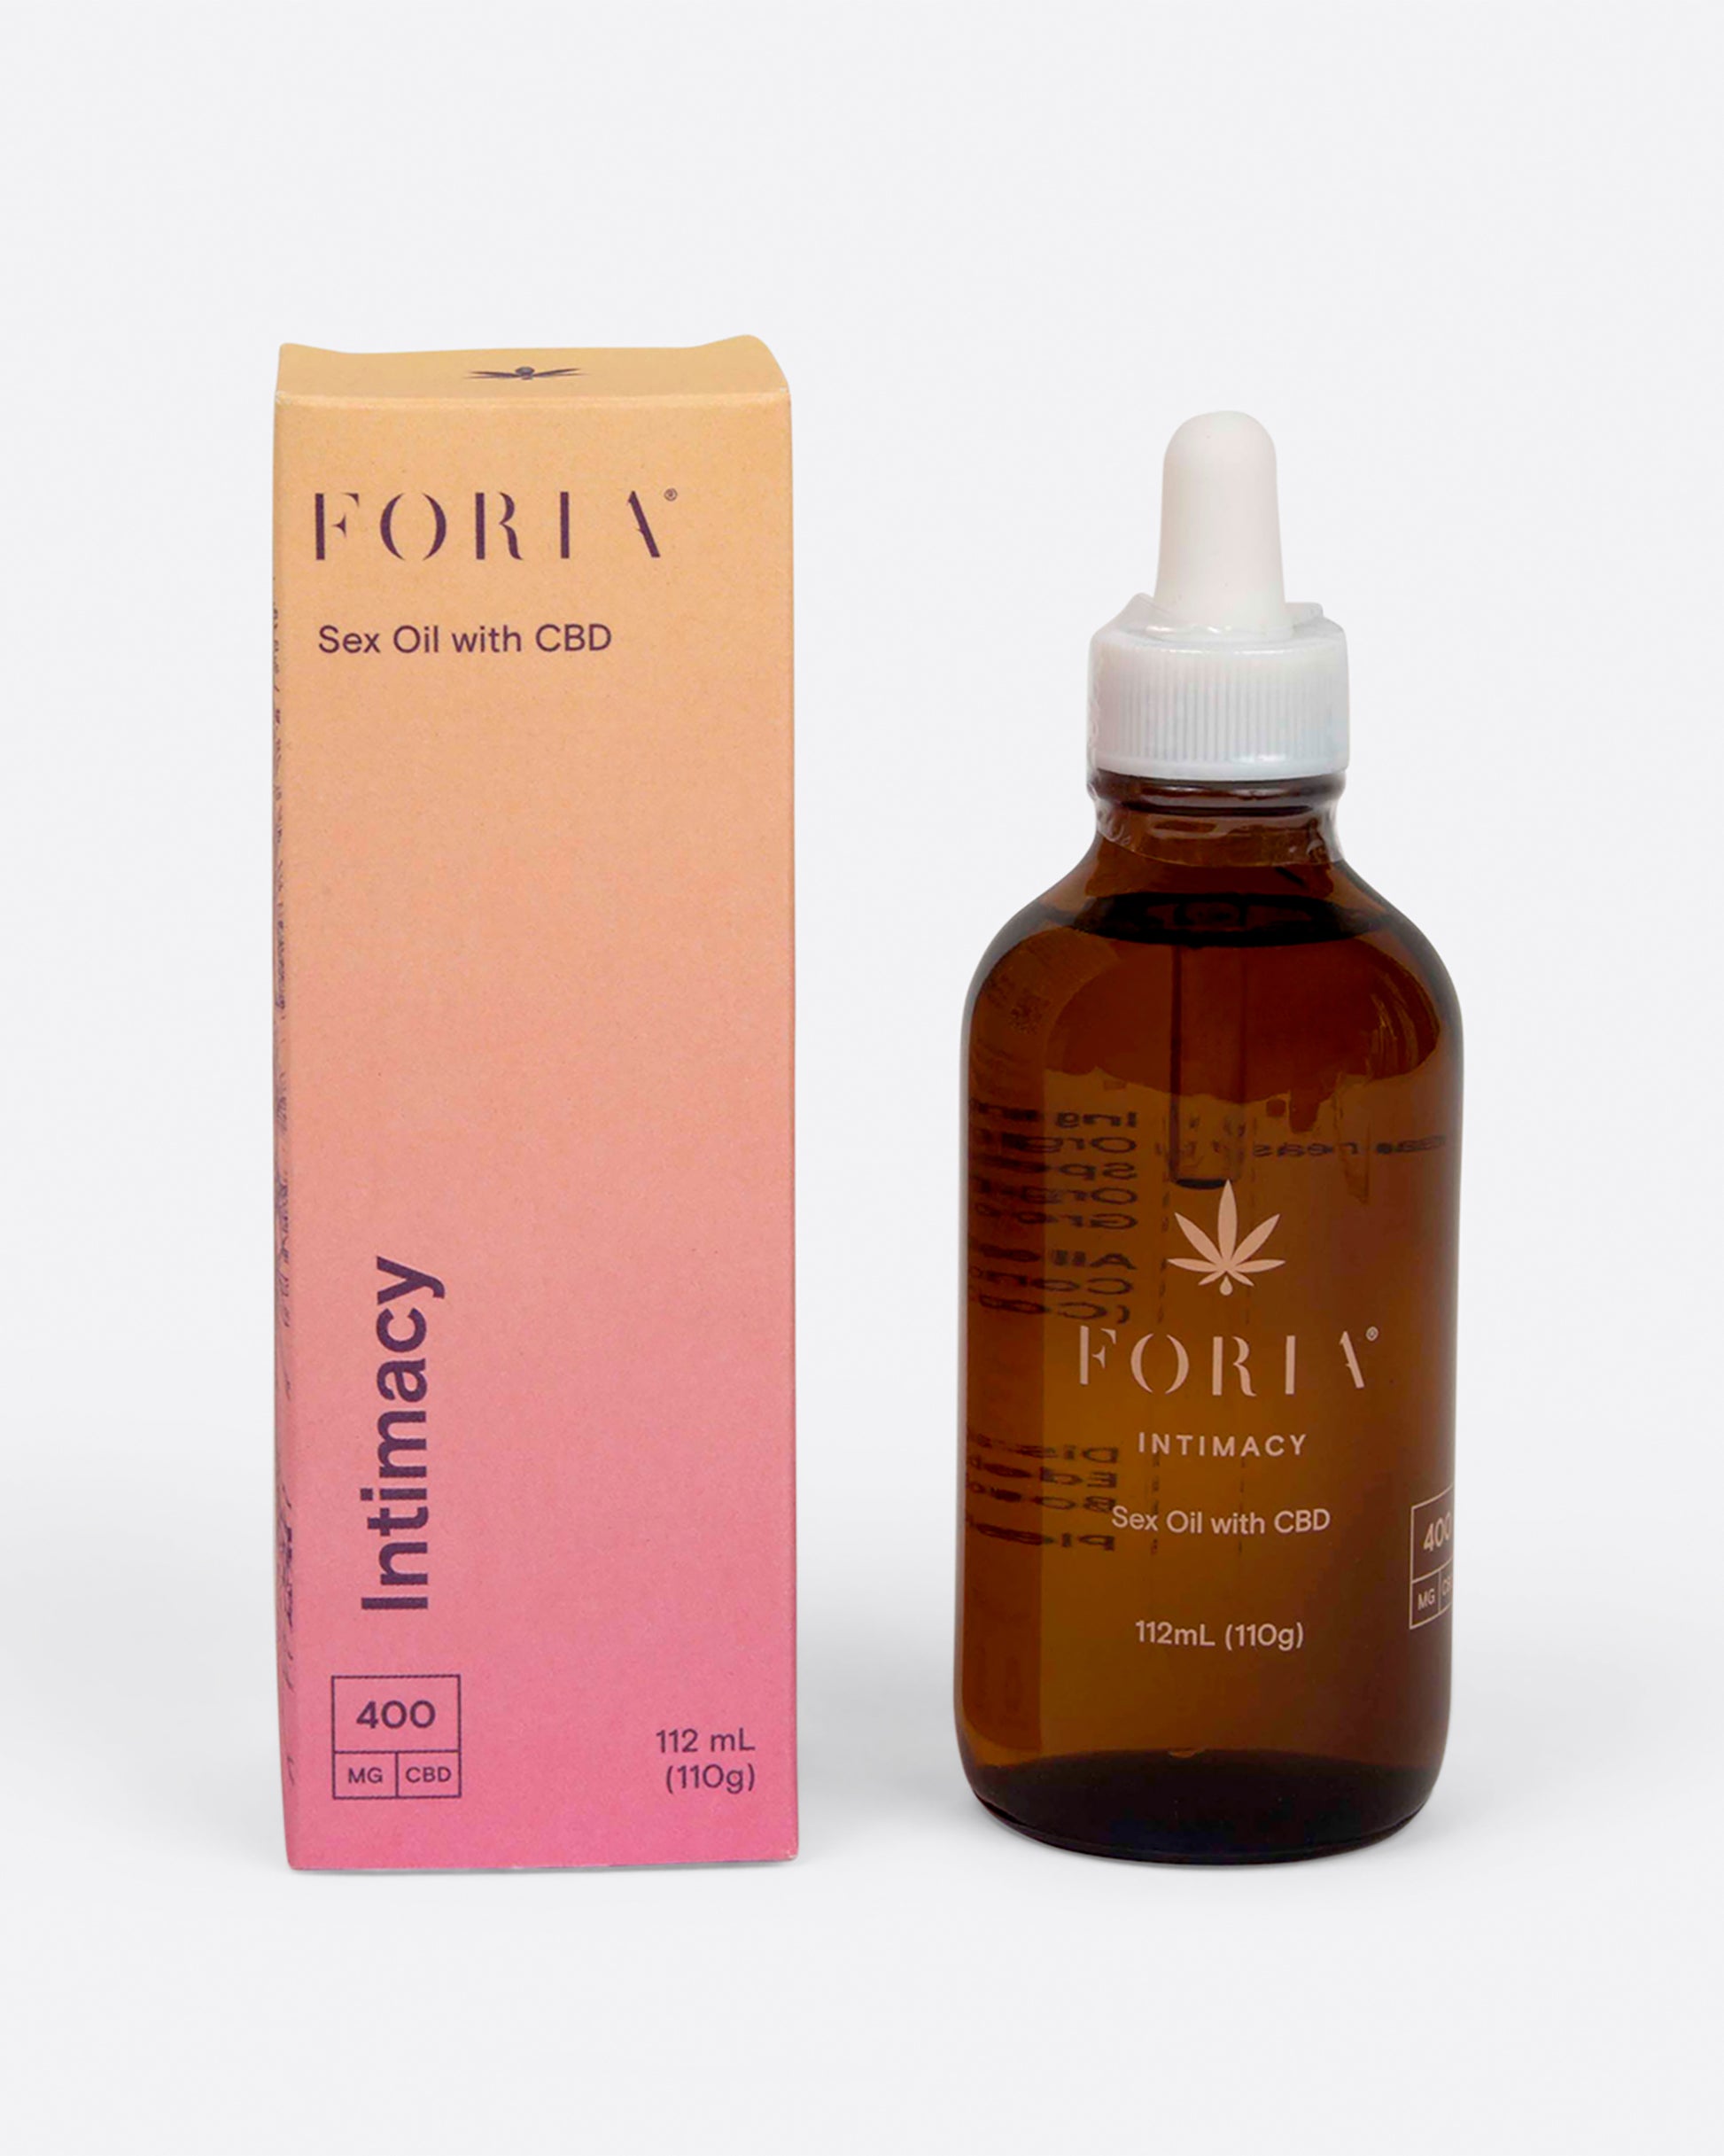 Foria CBD Intimacy Sex Oil shown with the bottle standing next to the box.